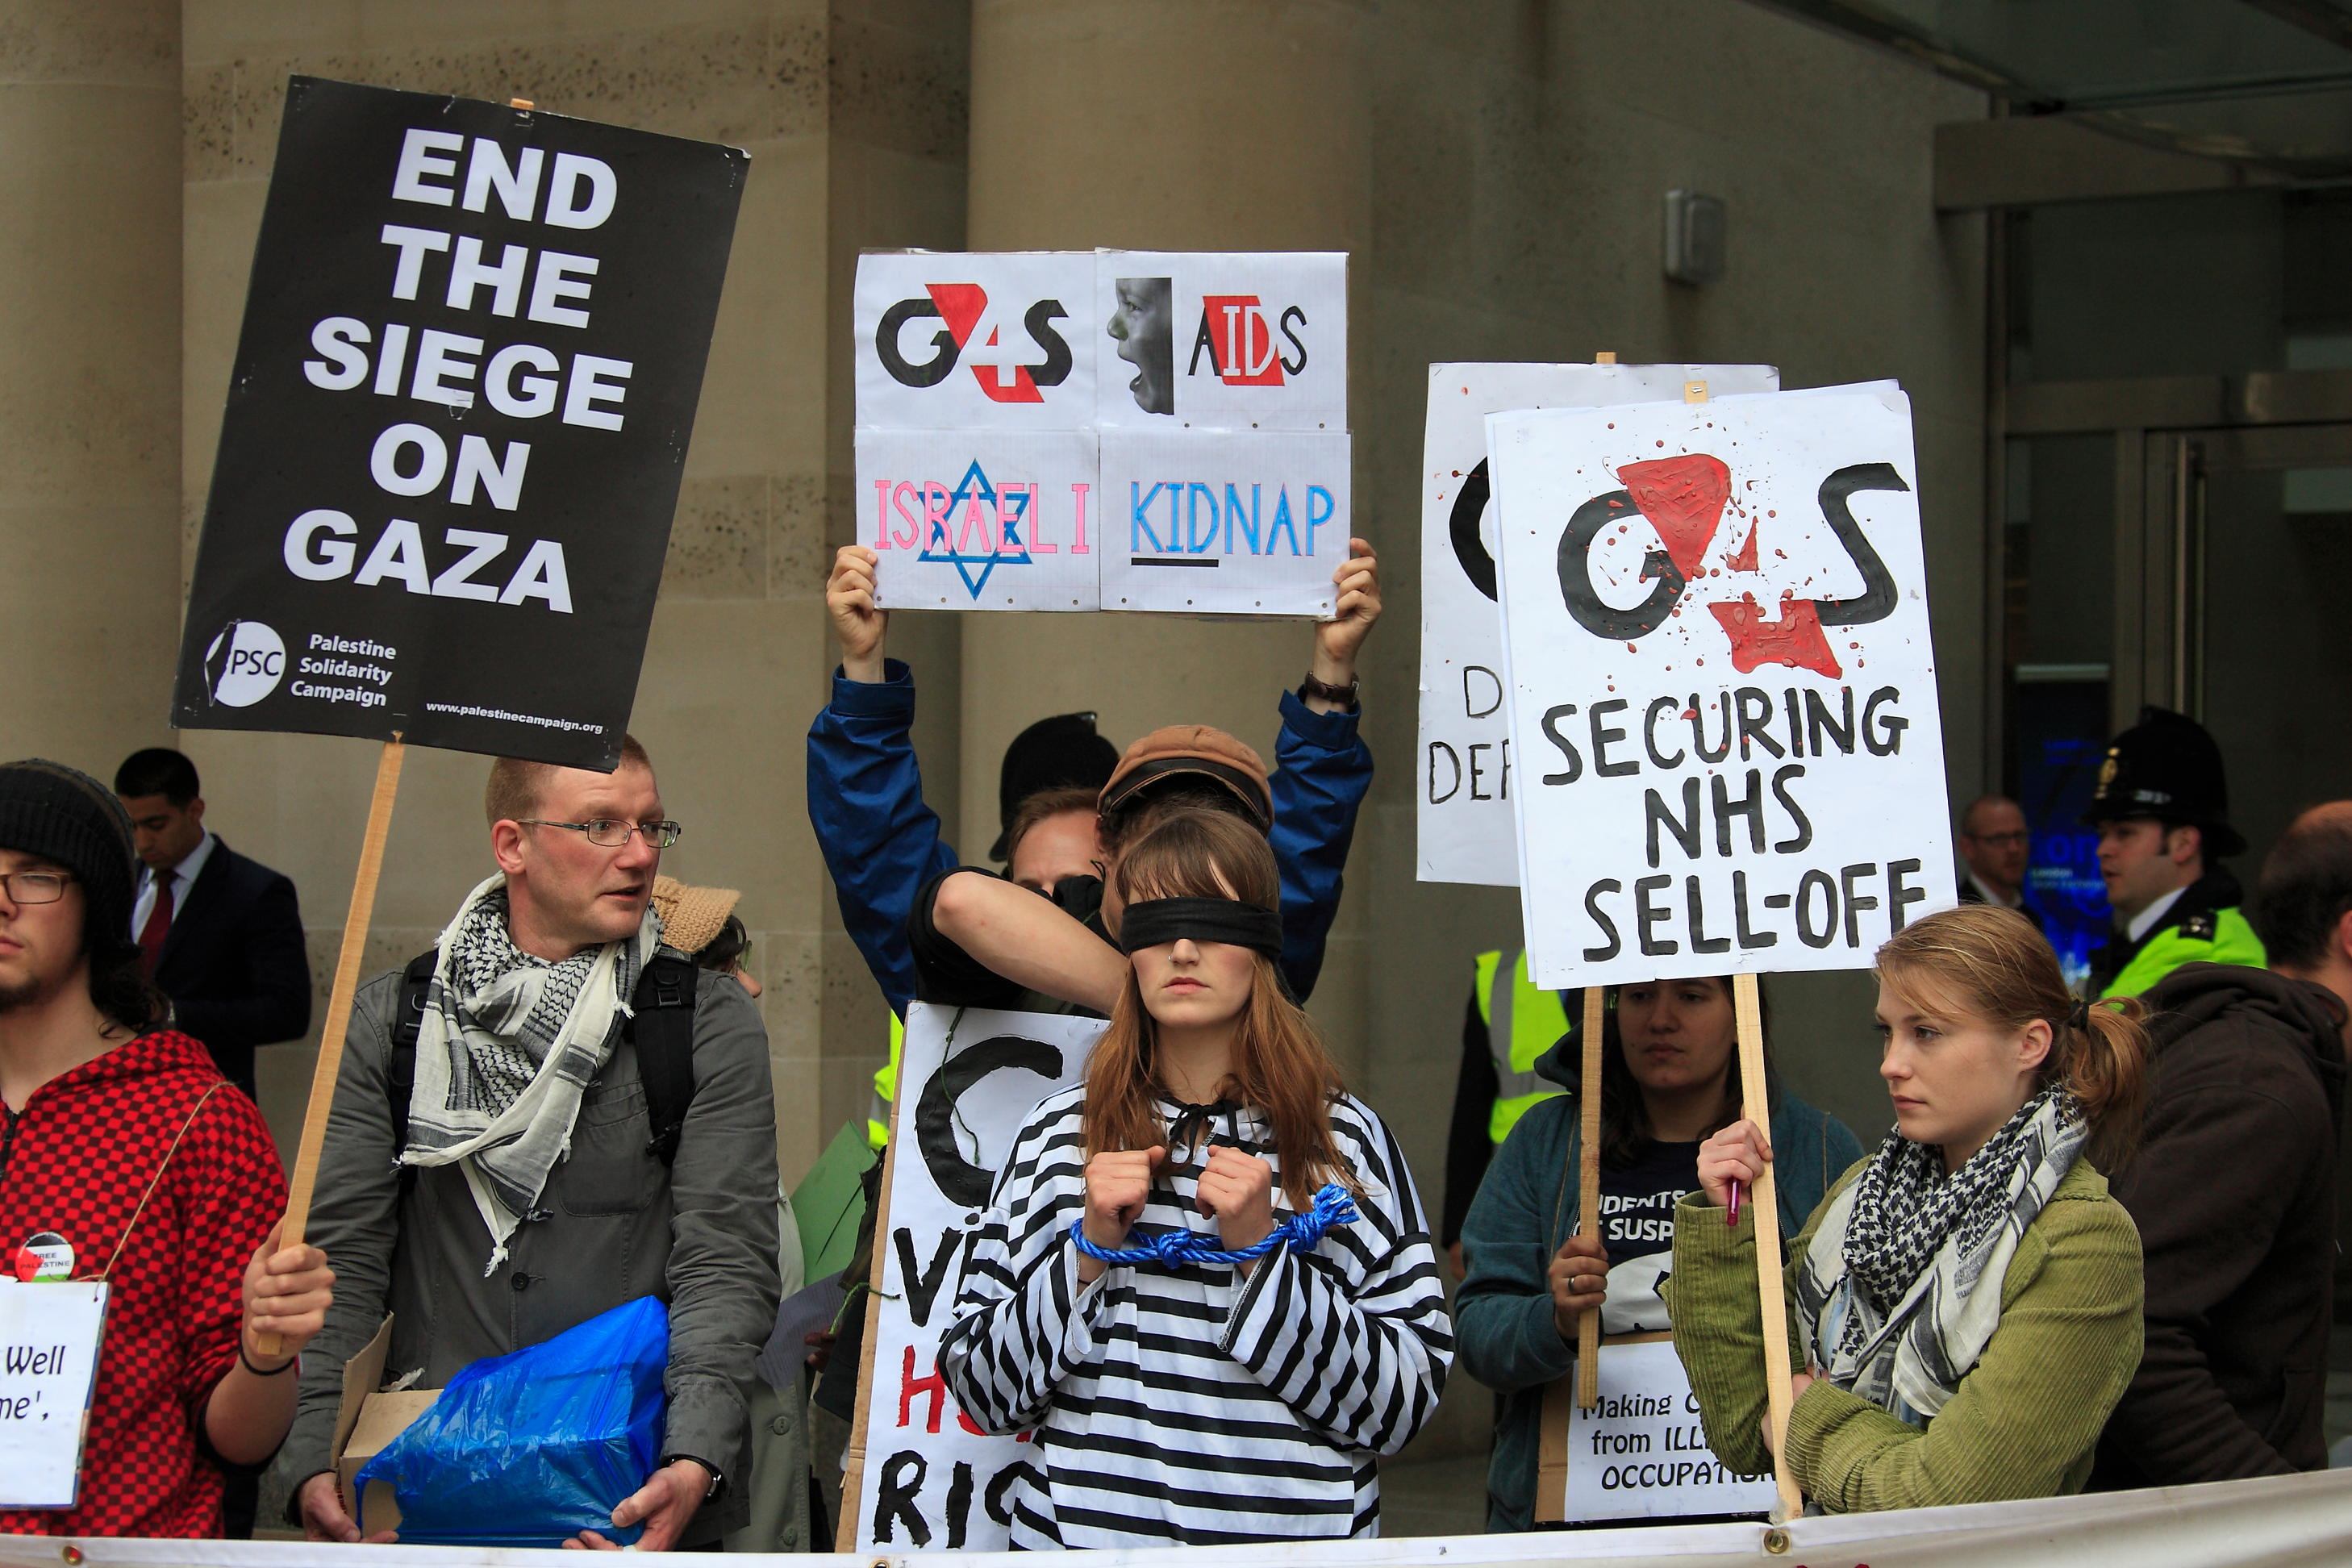 Activists protest against G4S outside the London Stock Exchange yesterday